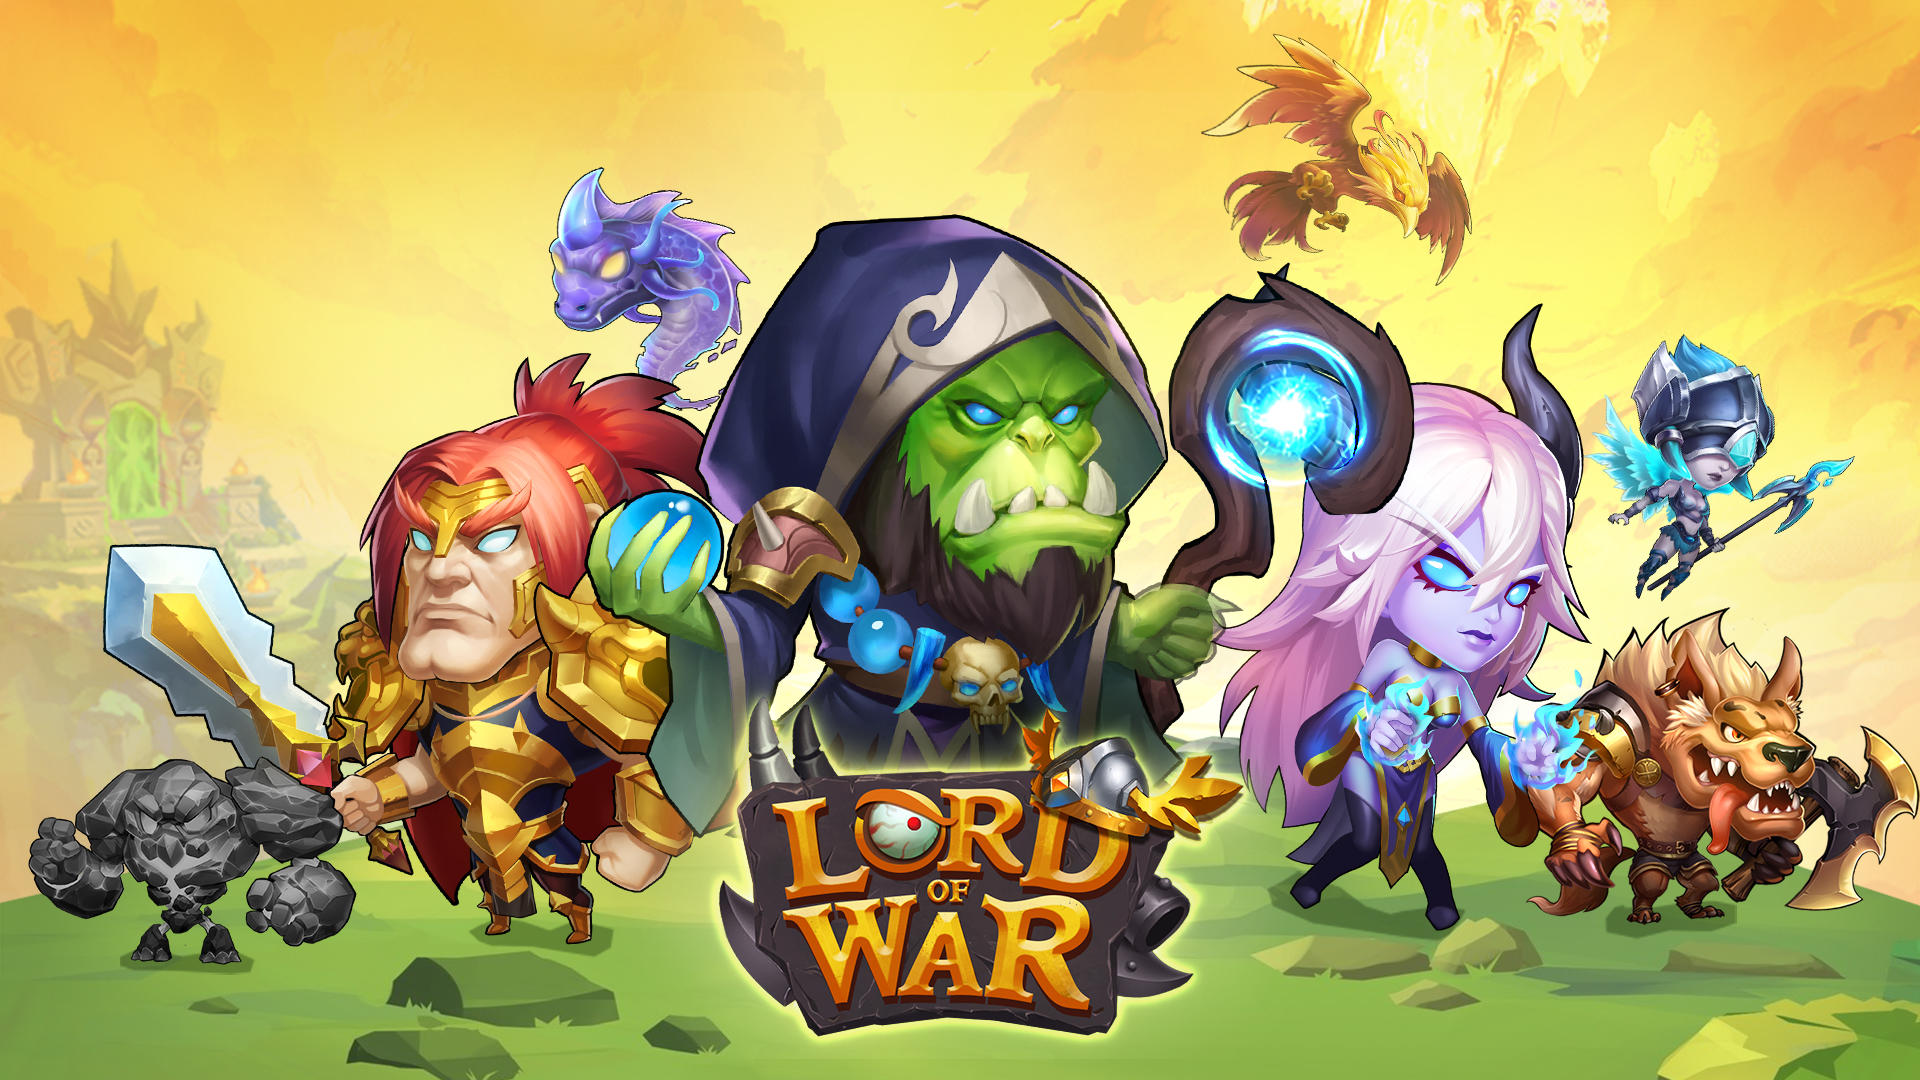 More heroes online world news! Along with a special code #heroes #hero